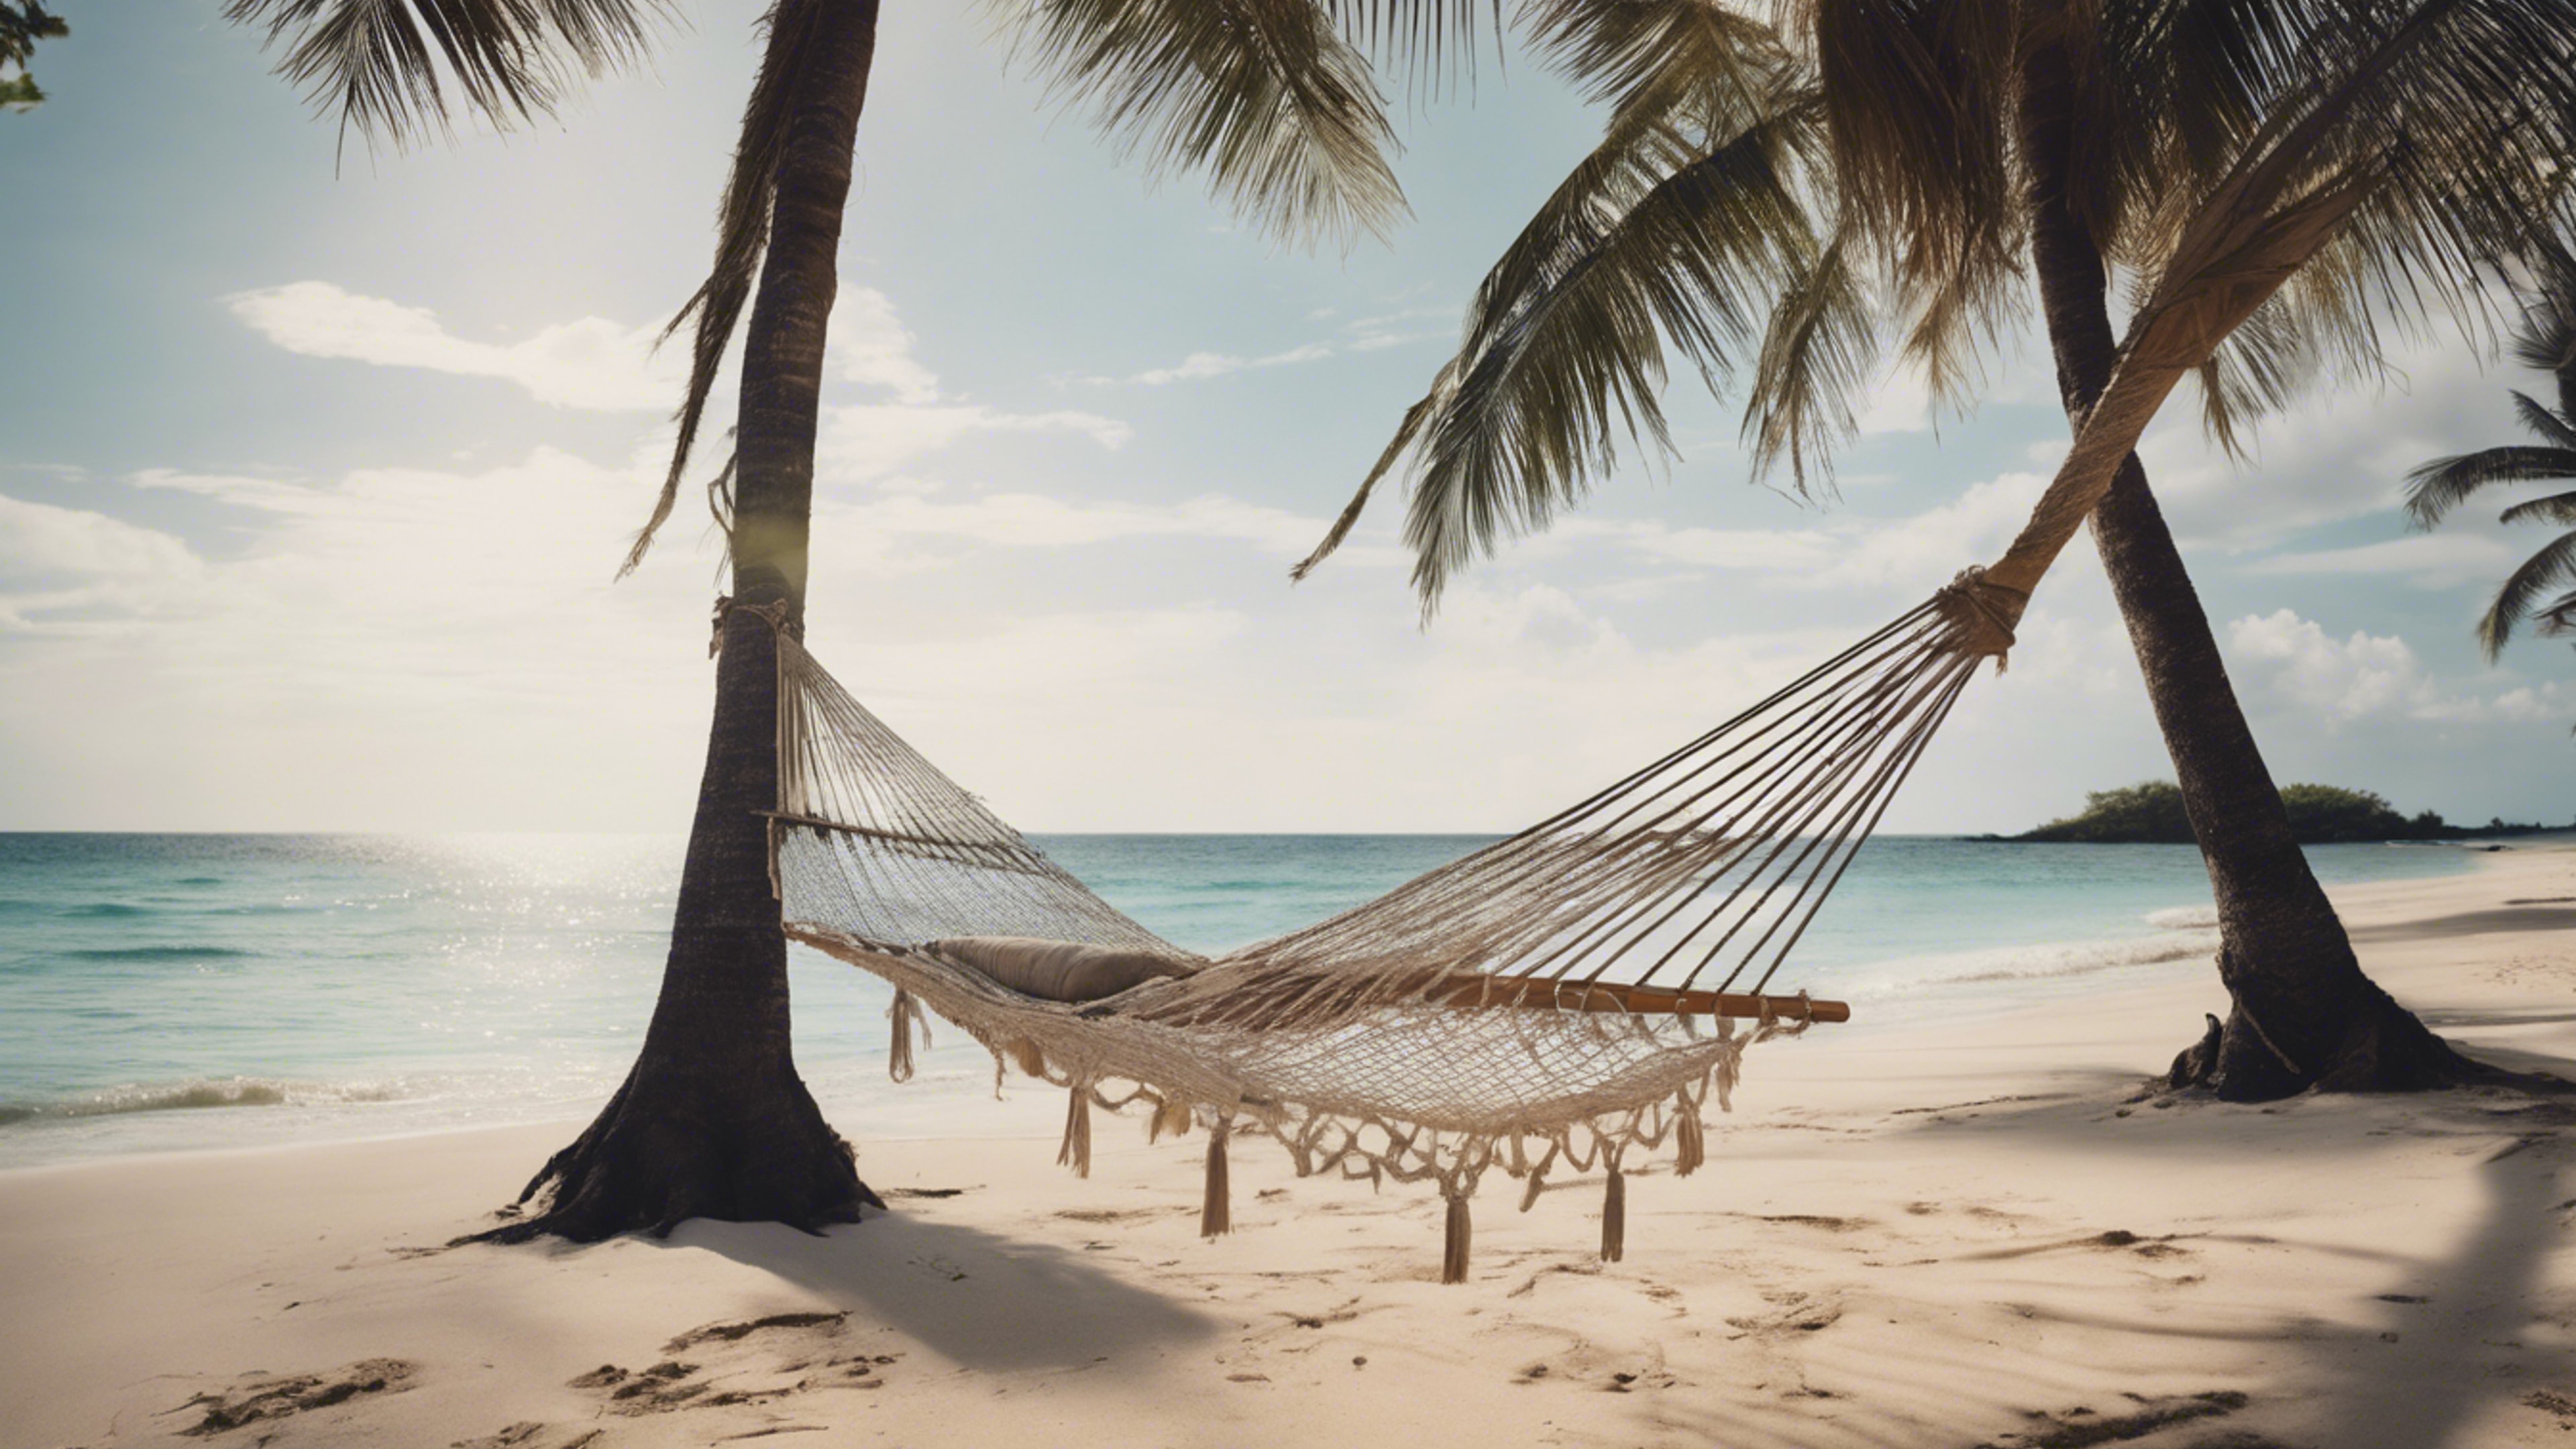 A hammock strung between two palm trees on a deserted tropical beach.壁紙[73ce834546c44a17956c]